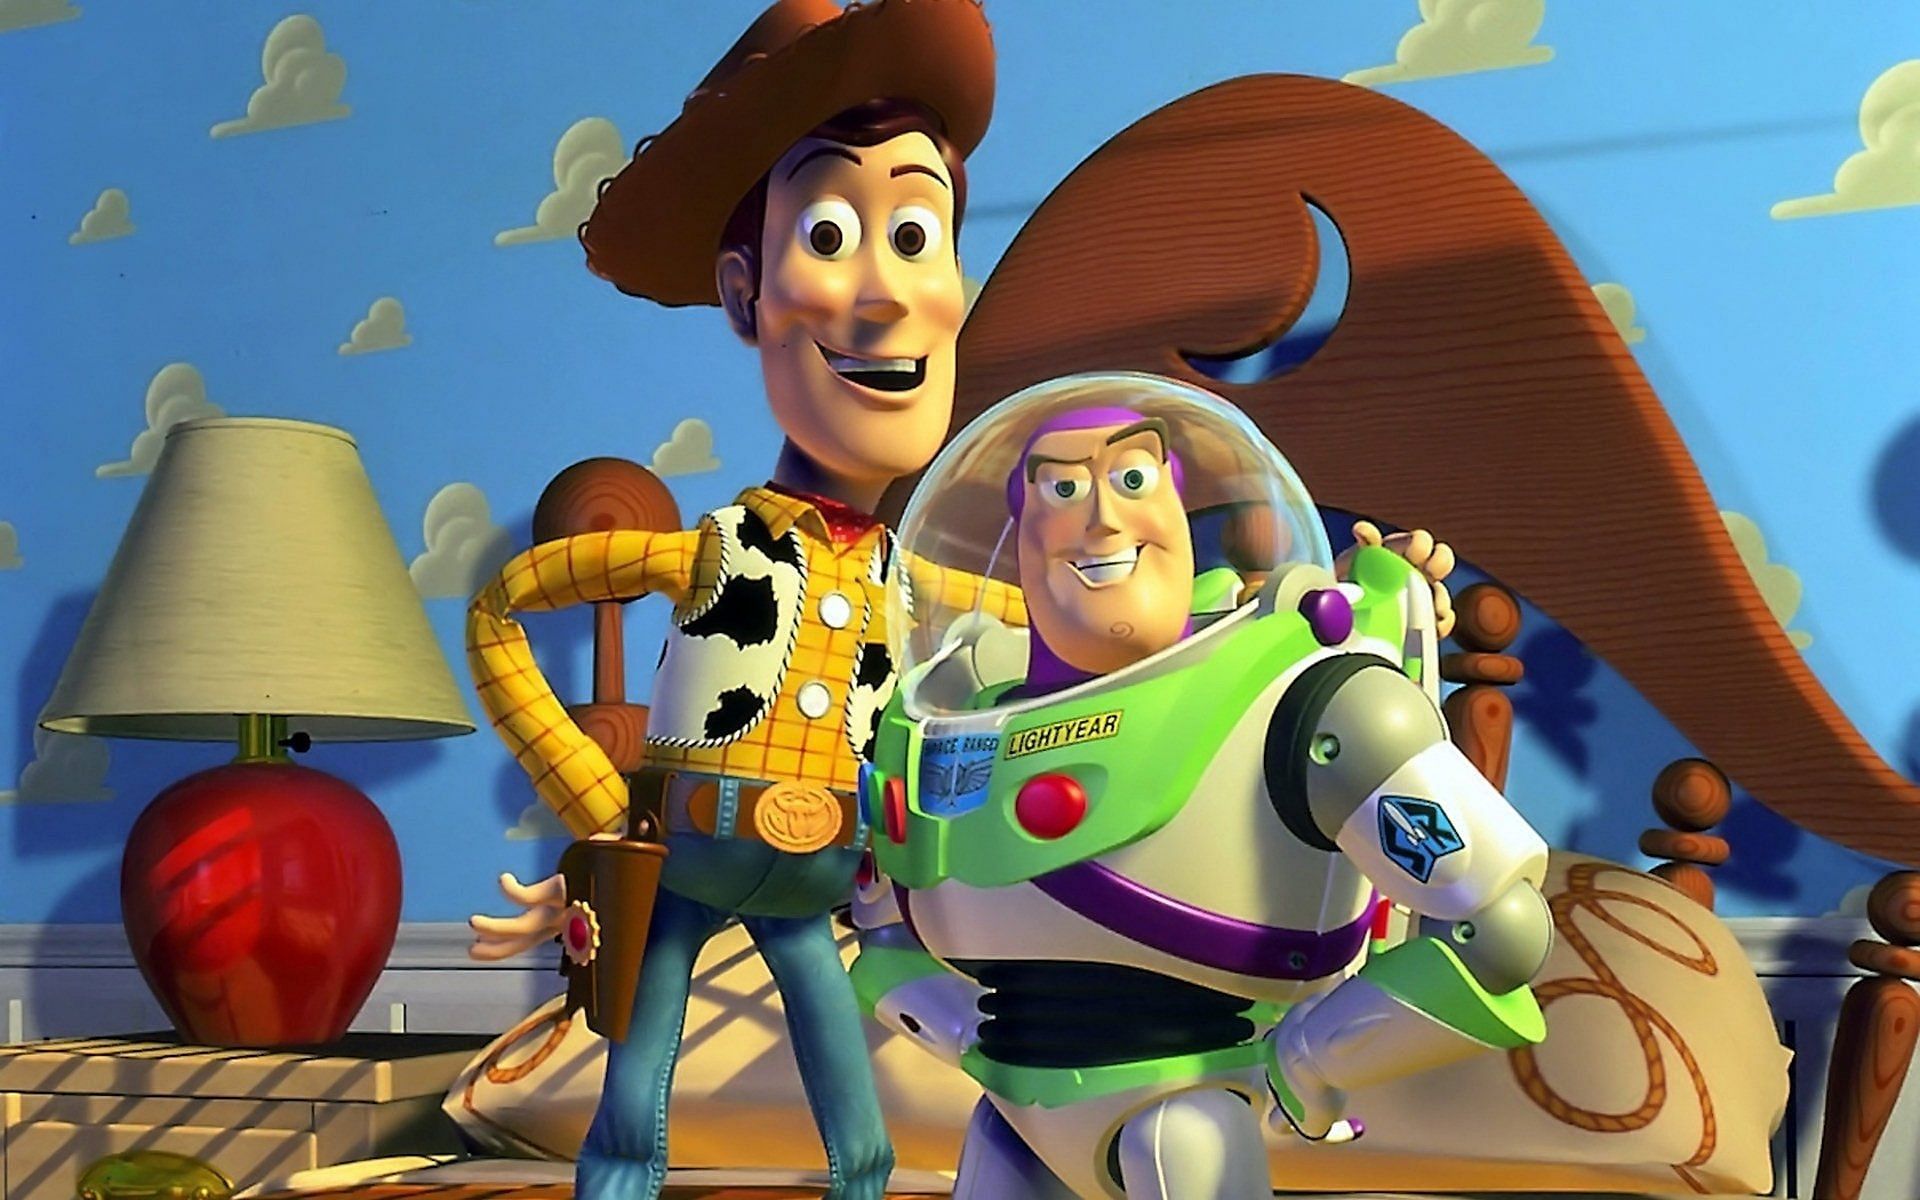 Toy Story 5: Everything We Know About the Upcoming Pixar Movie - IGN